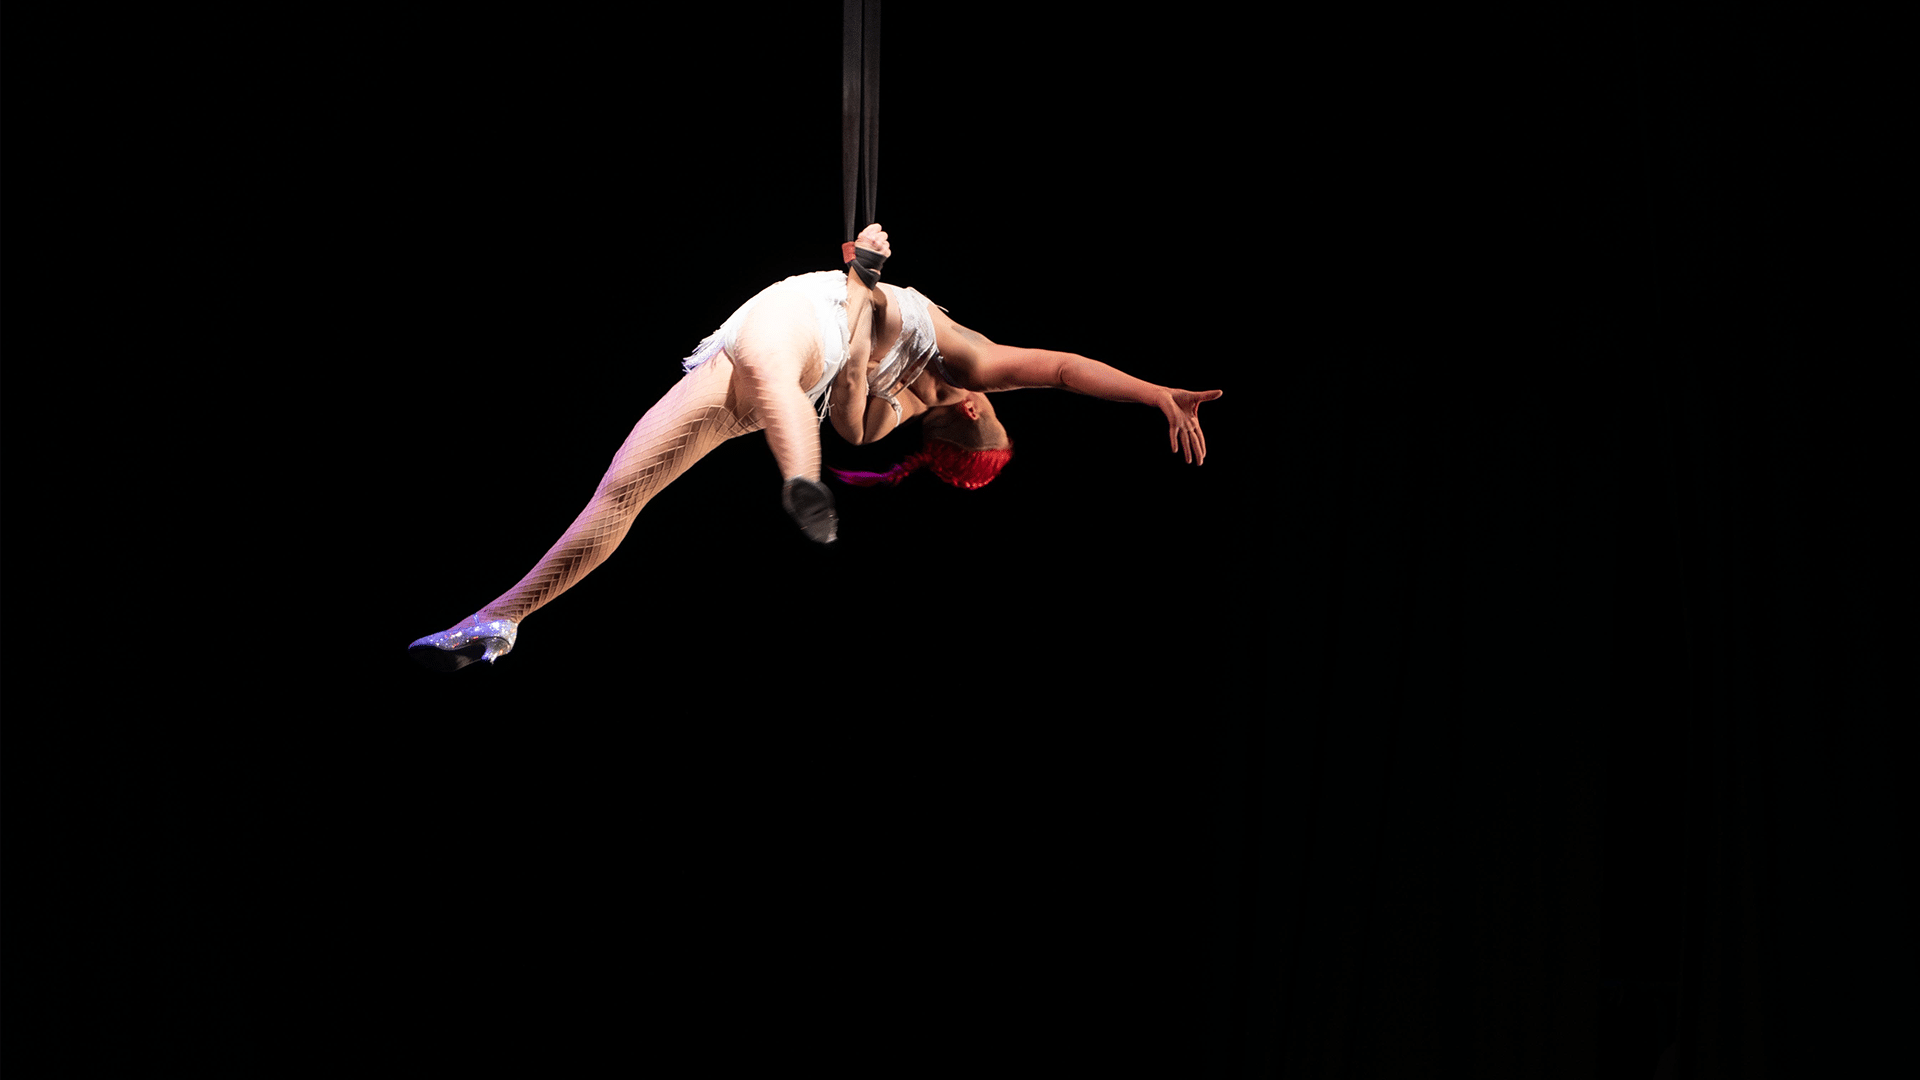 A straps artist performs as side planche.